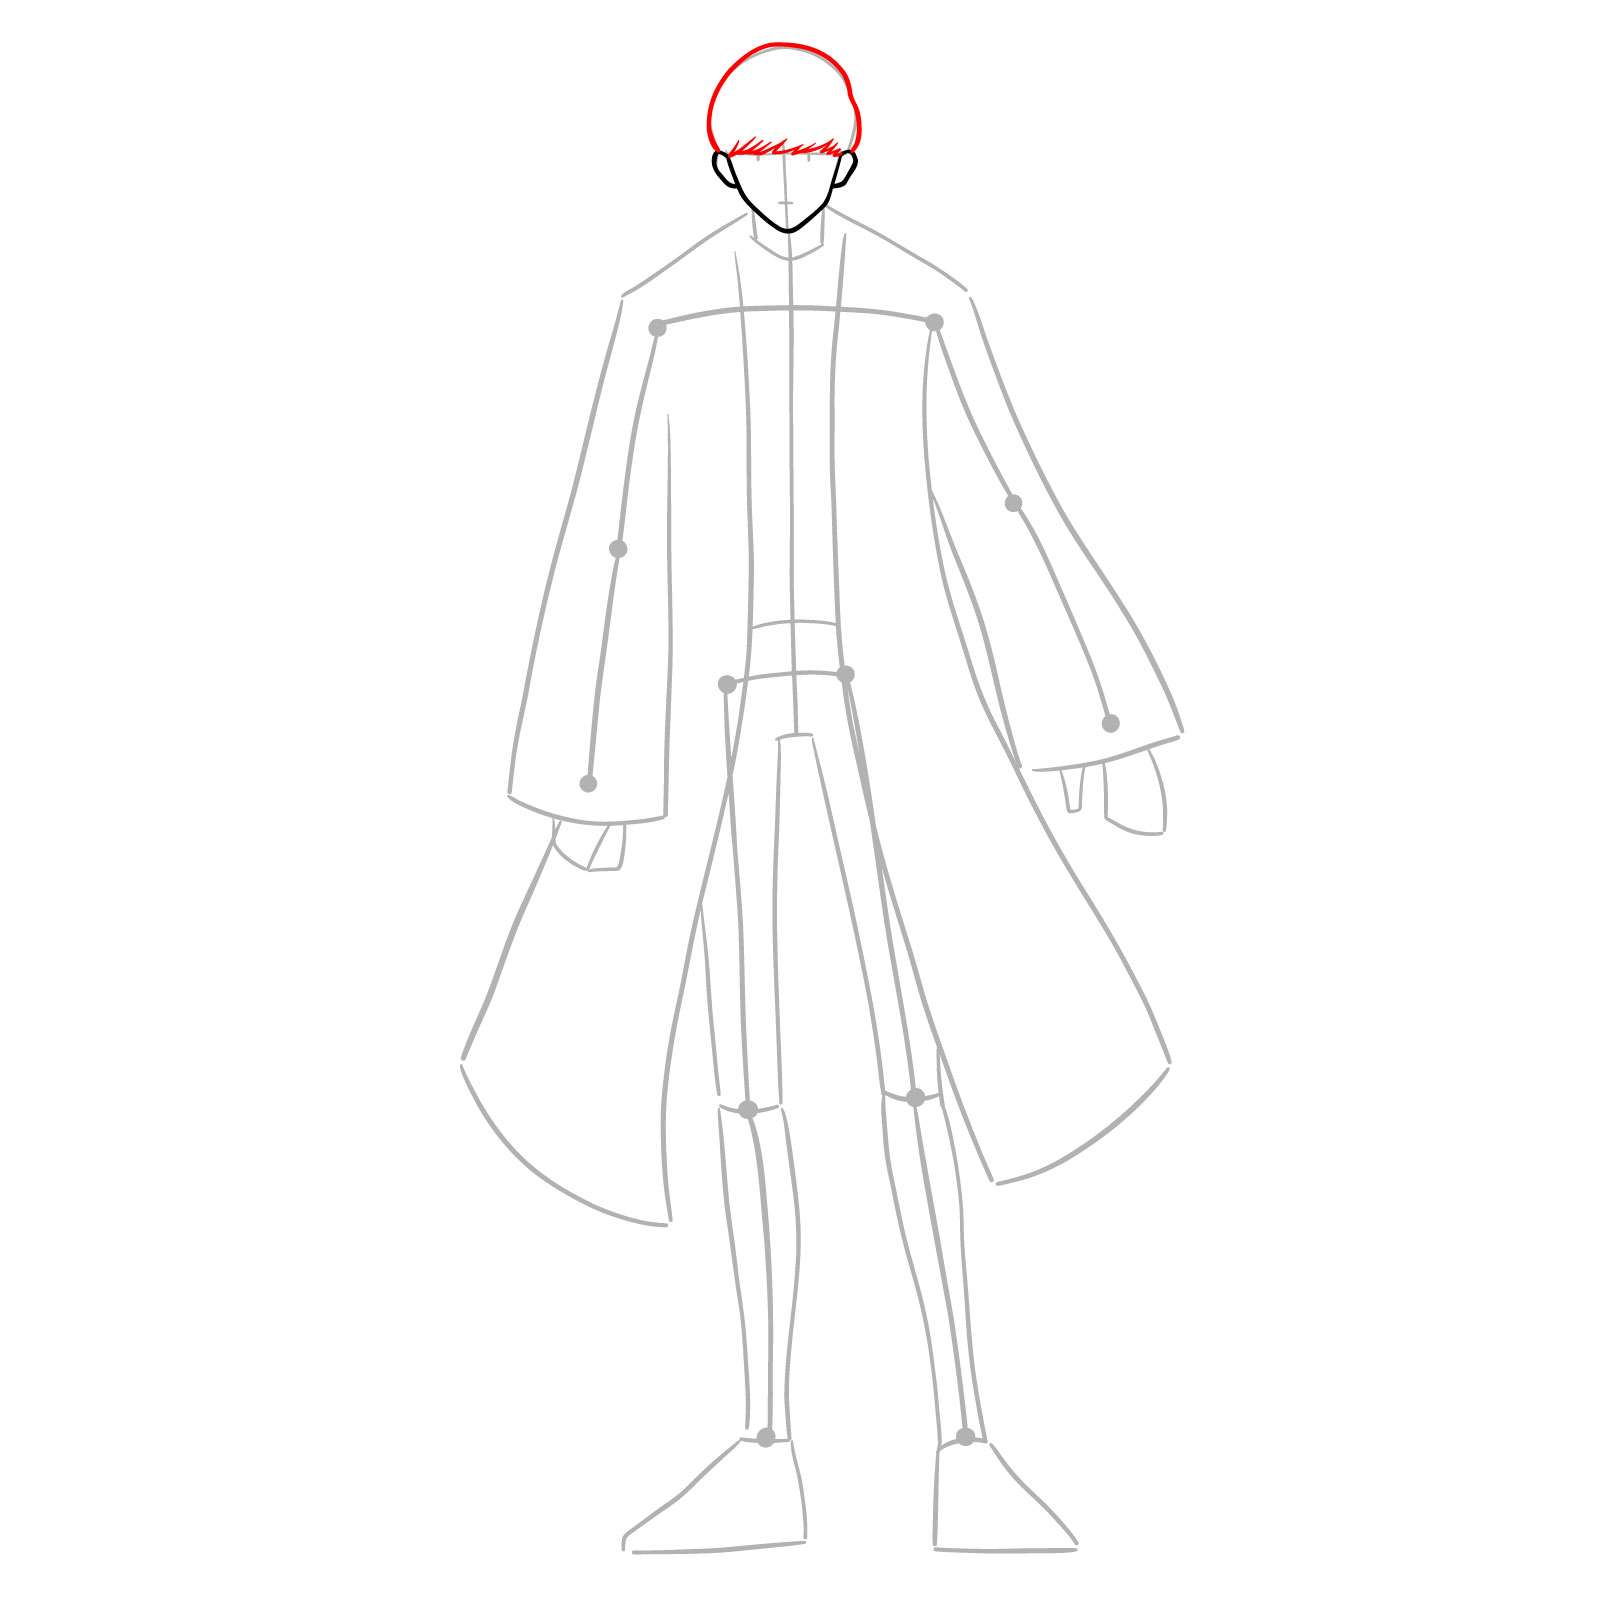 Mash full body drawing guide highlighting hair outline for detailed character sketch - step 05